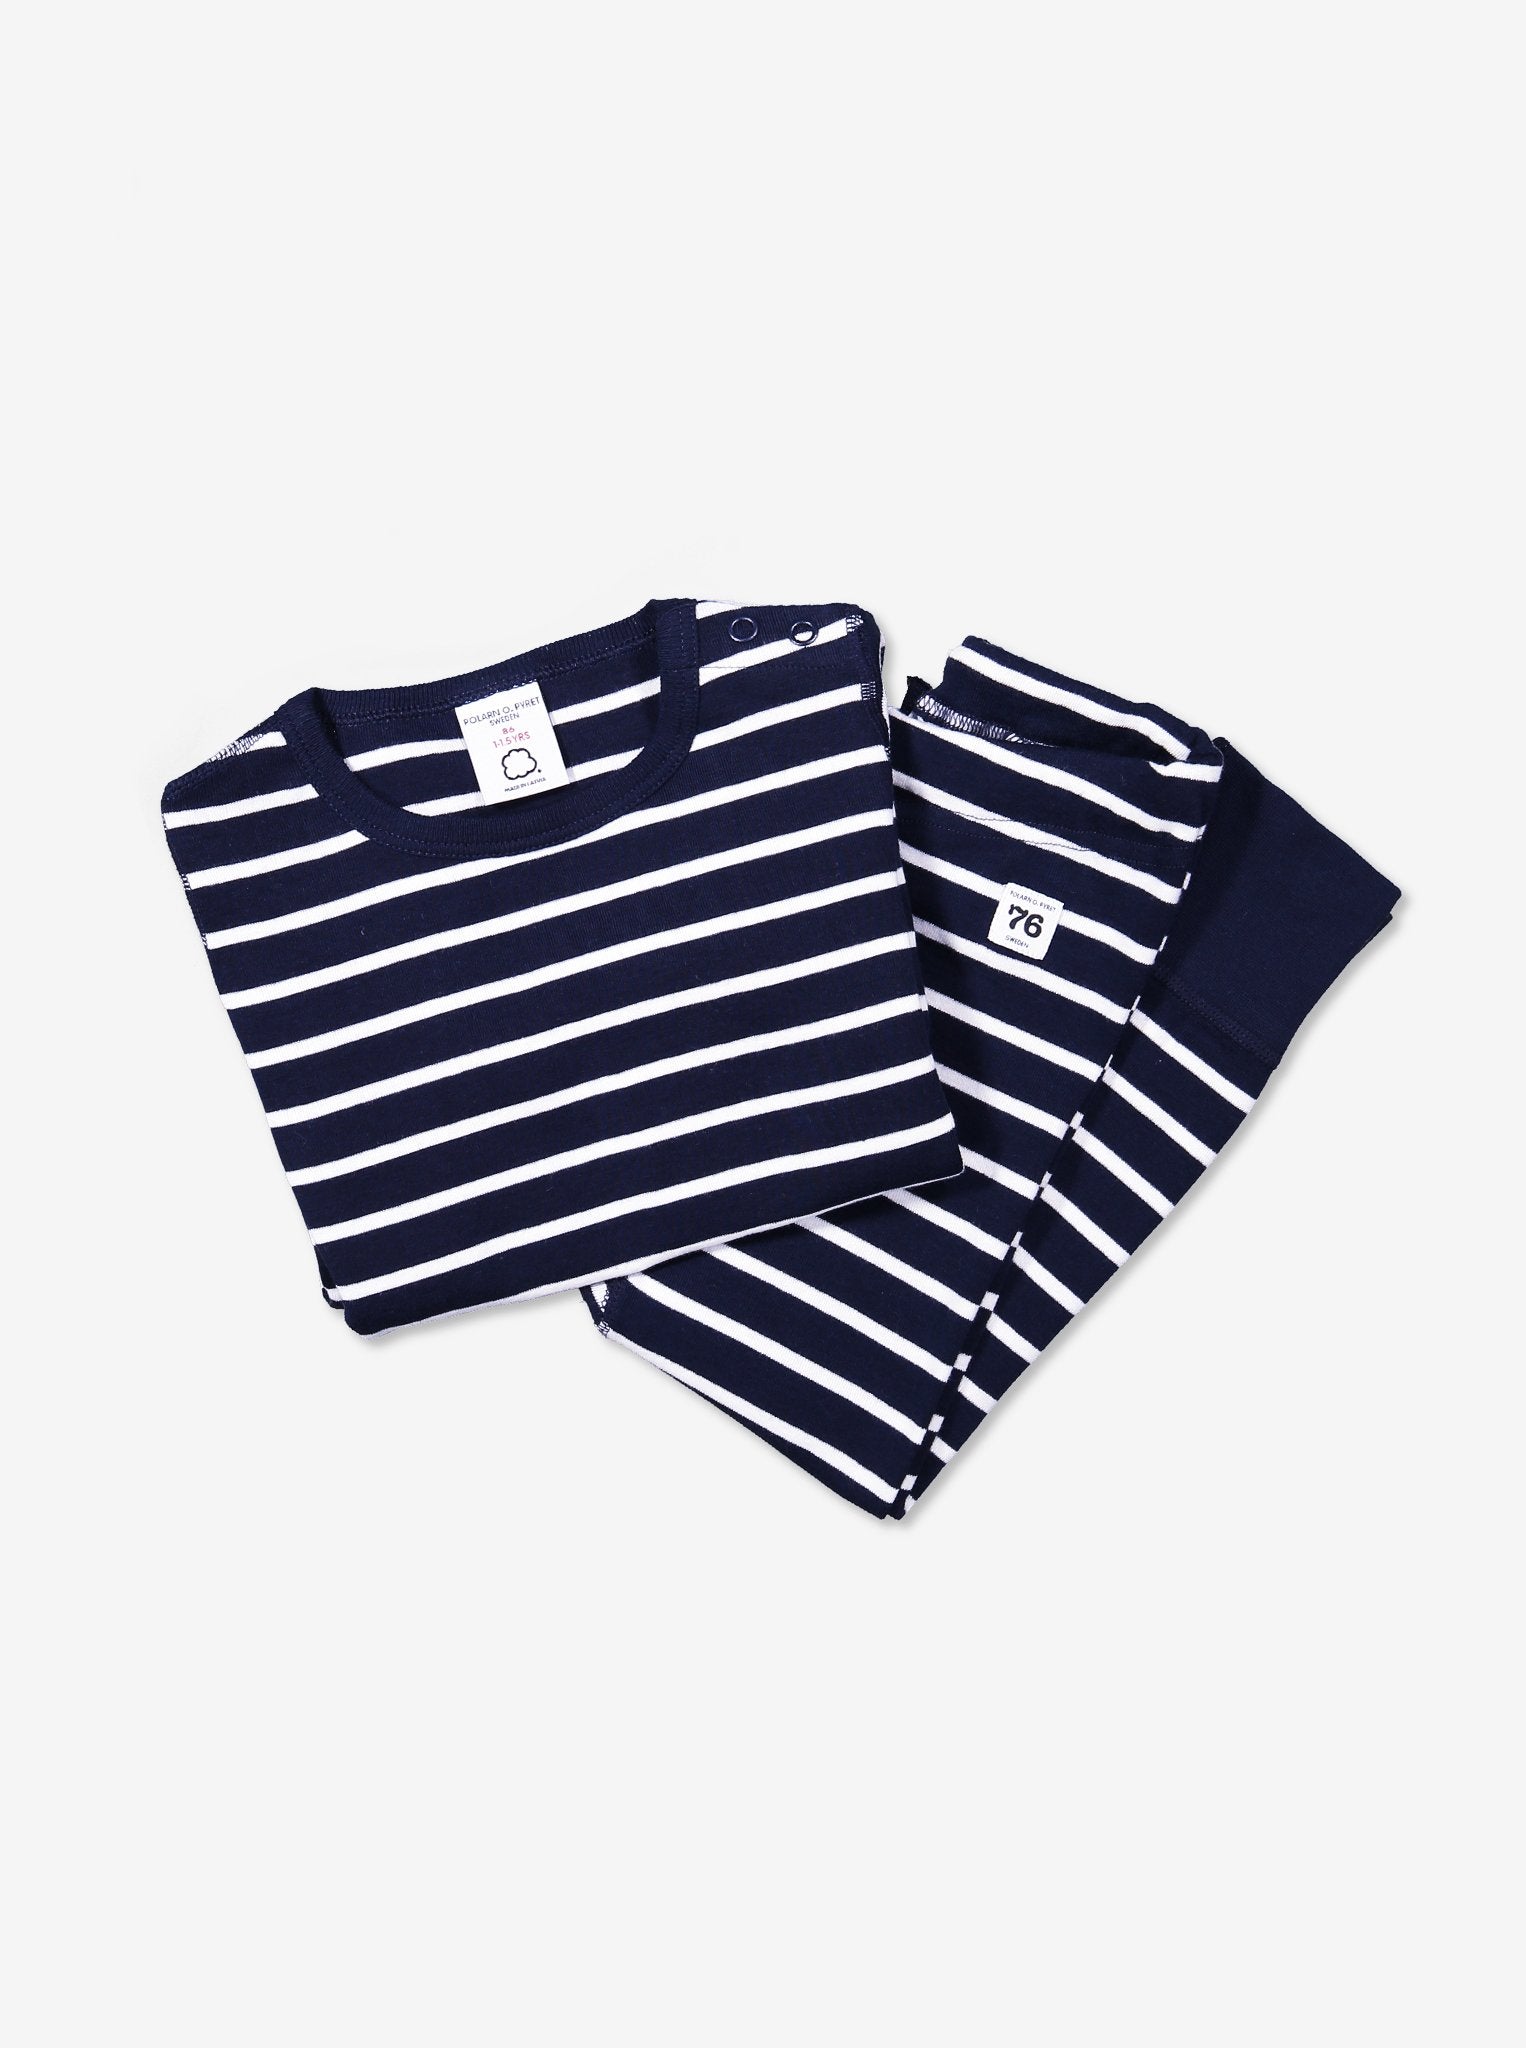 navy blue and white stripes kids leggings and top, ethical organic cotton, long lasting polarn o. pyret quality